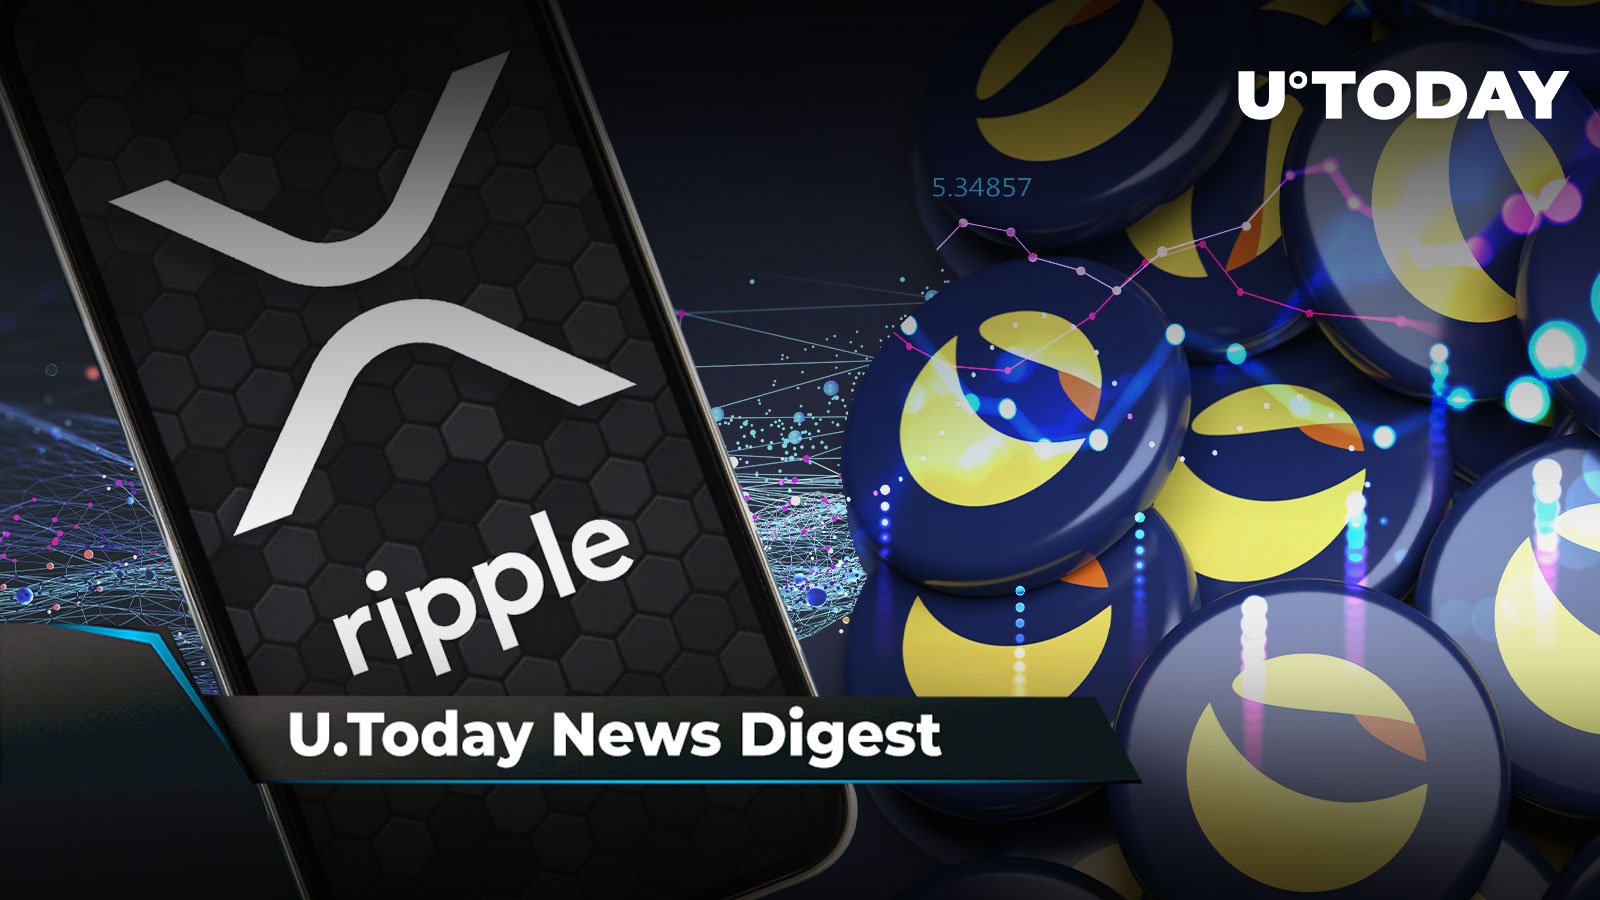 terra-coins-may-rally-on-do-kwon-surprise-ripple-partner-defends-xrp-utility-crypto-youtuber-predicts-cardano-will-top-ethereum-crypto-news-digest-by-u-today